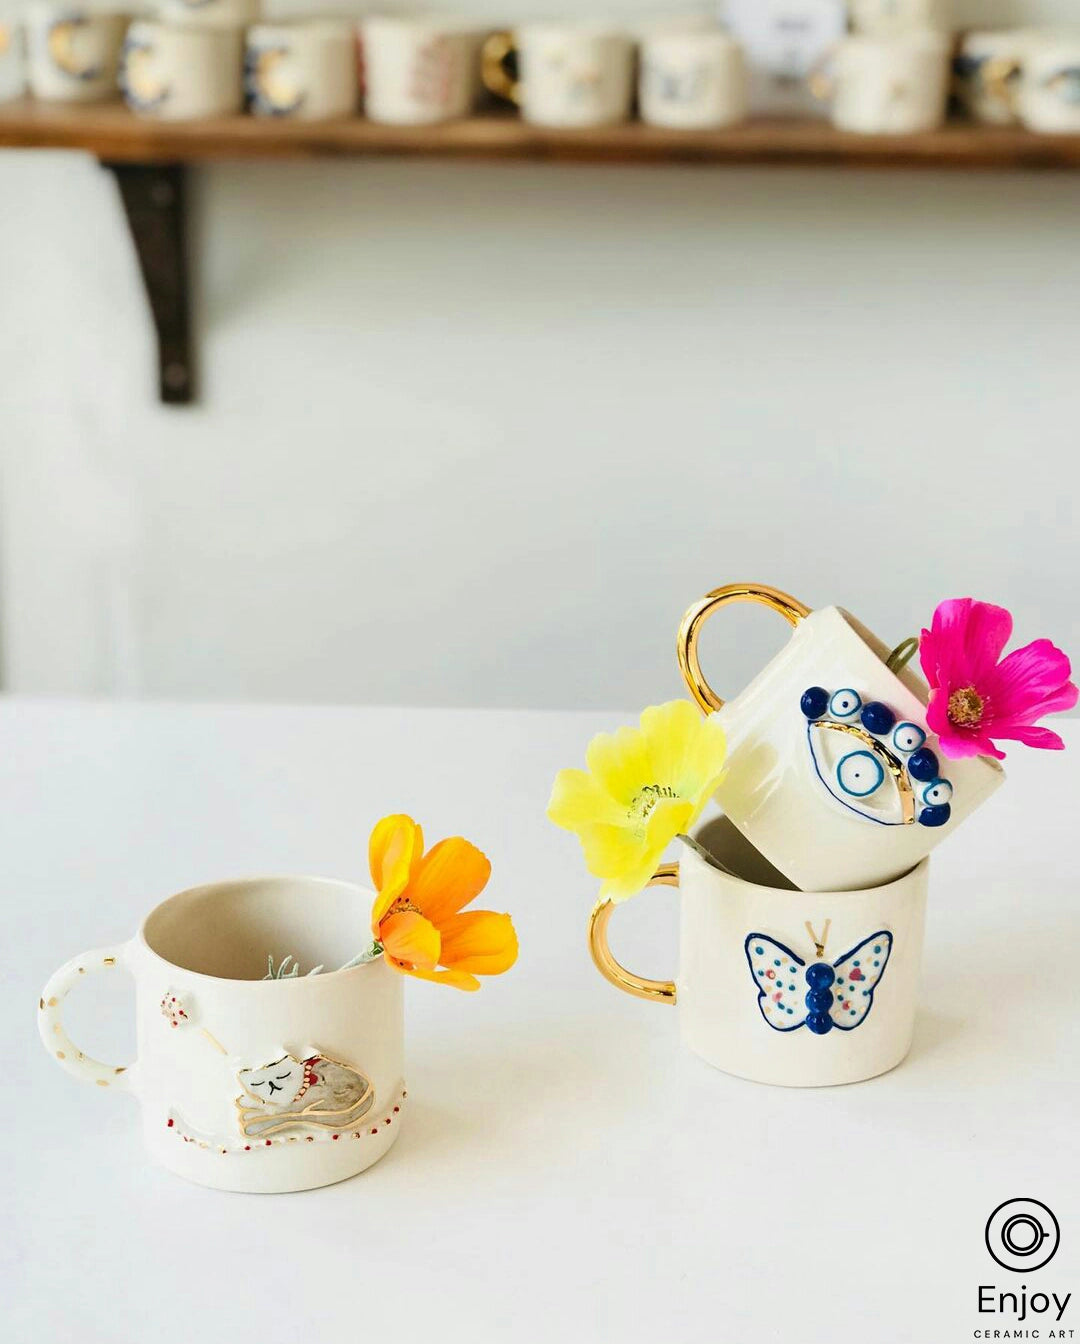 An artful arrangement of white ceramic mugs with golden handles, each featuring a unique blue design, such as an evil eye and a butterfly. Fresh flowers in vibrant orange, yellow, and pink hues are playfully placed in the mugs, adding a touch of natural beauty to the scene. In the soft-focus background, a wooden shelf holds an array of similarly styled mugs, contributing to the warm, creative atmosphere.